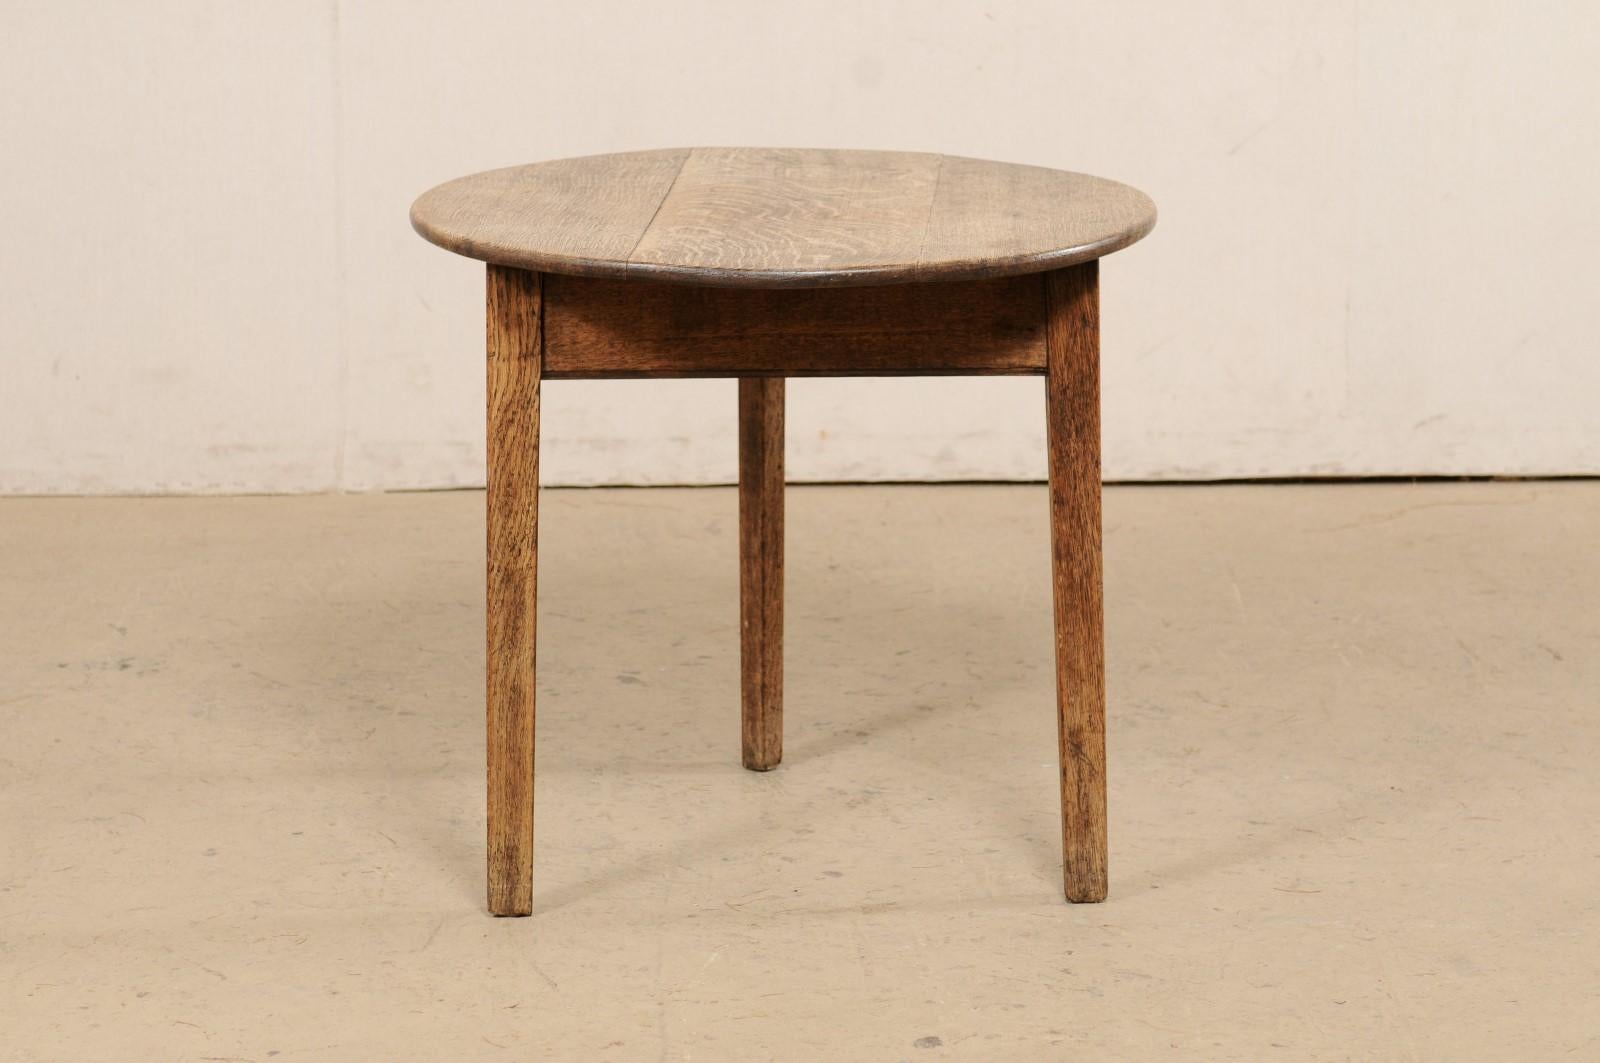 An English round-shaped oak-wood occasional table from the 19th century. This antique center table from England has a round top which overhangs a triangular apron below, and is raised on three triangular legs. Please note that the oak top is more